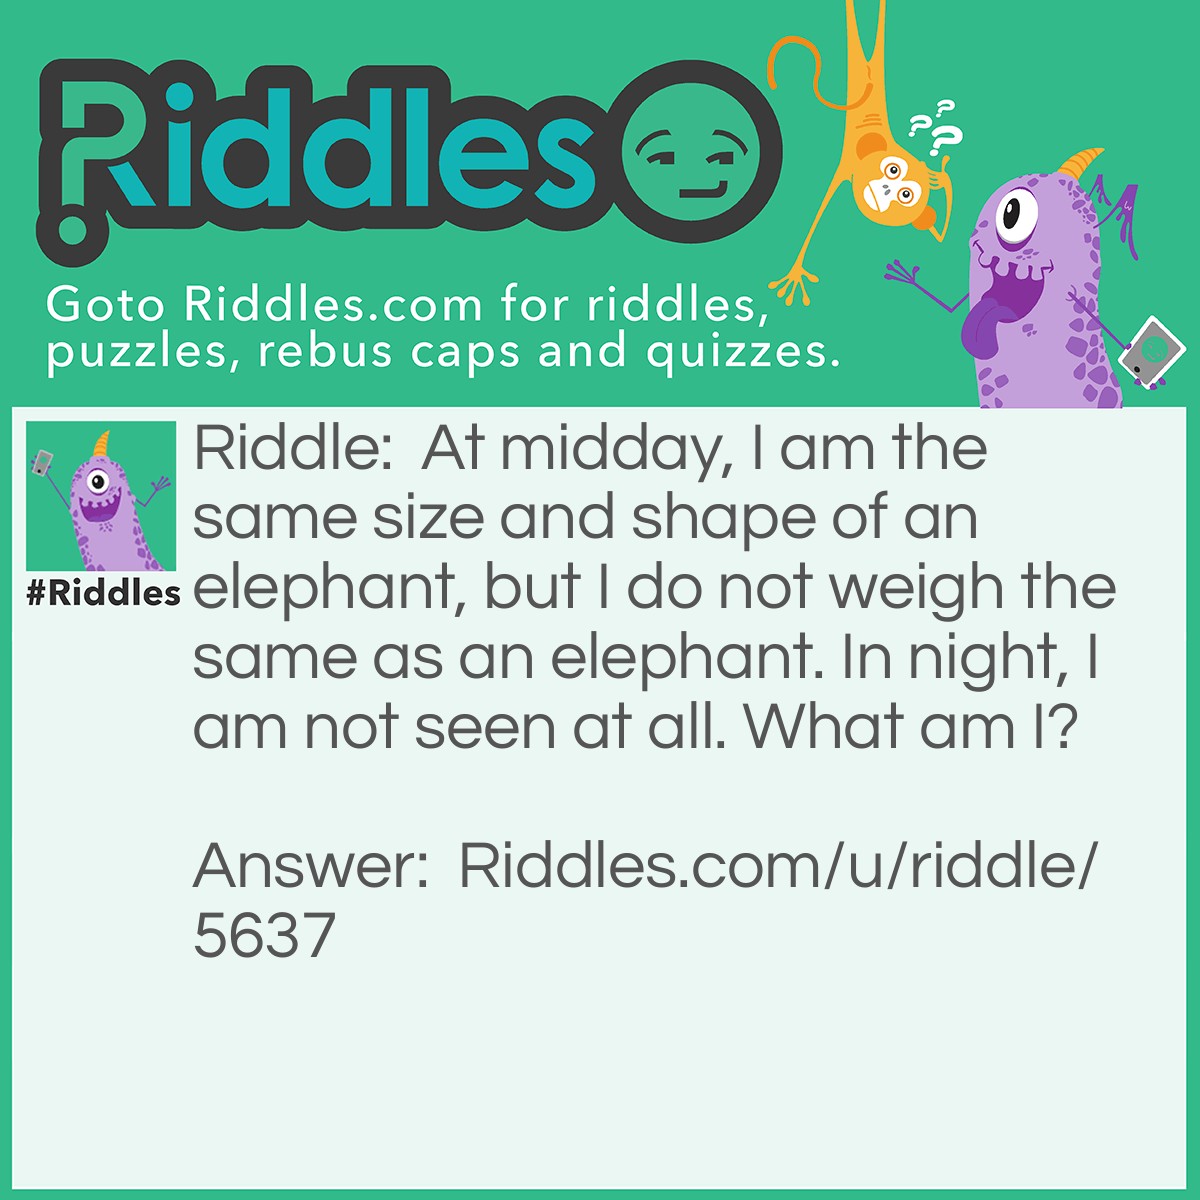 Riddle: At midday, I am the same size and shape of an elephant, but I do not weigh the same as an elephant. In night, I am not seen at all. What am I? Answer: An elephant's shadow